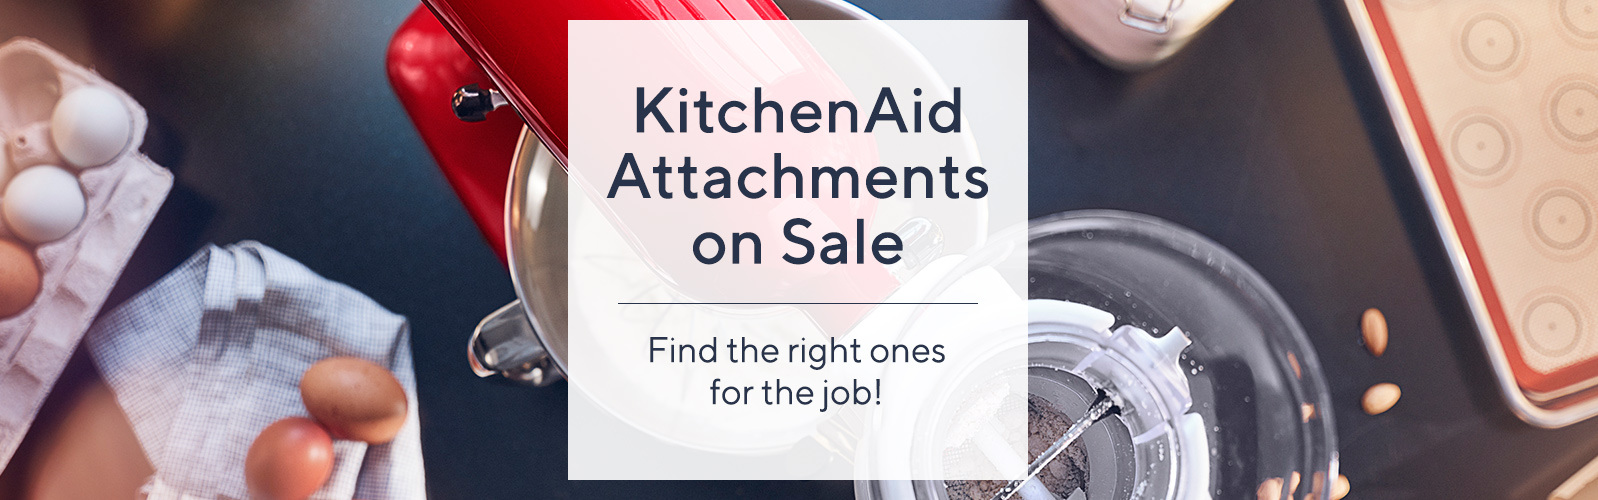 KitchenAid Attachments on Sale  Find the right ones for the job! 